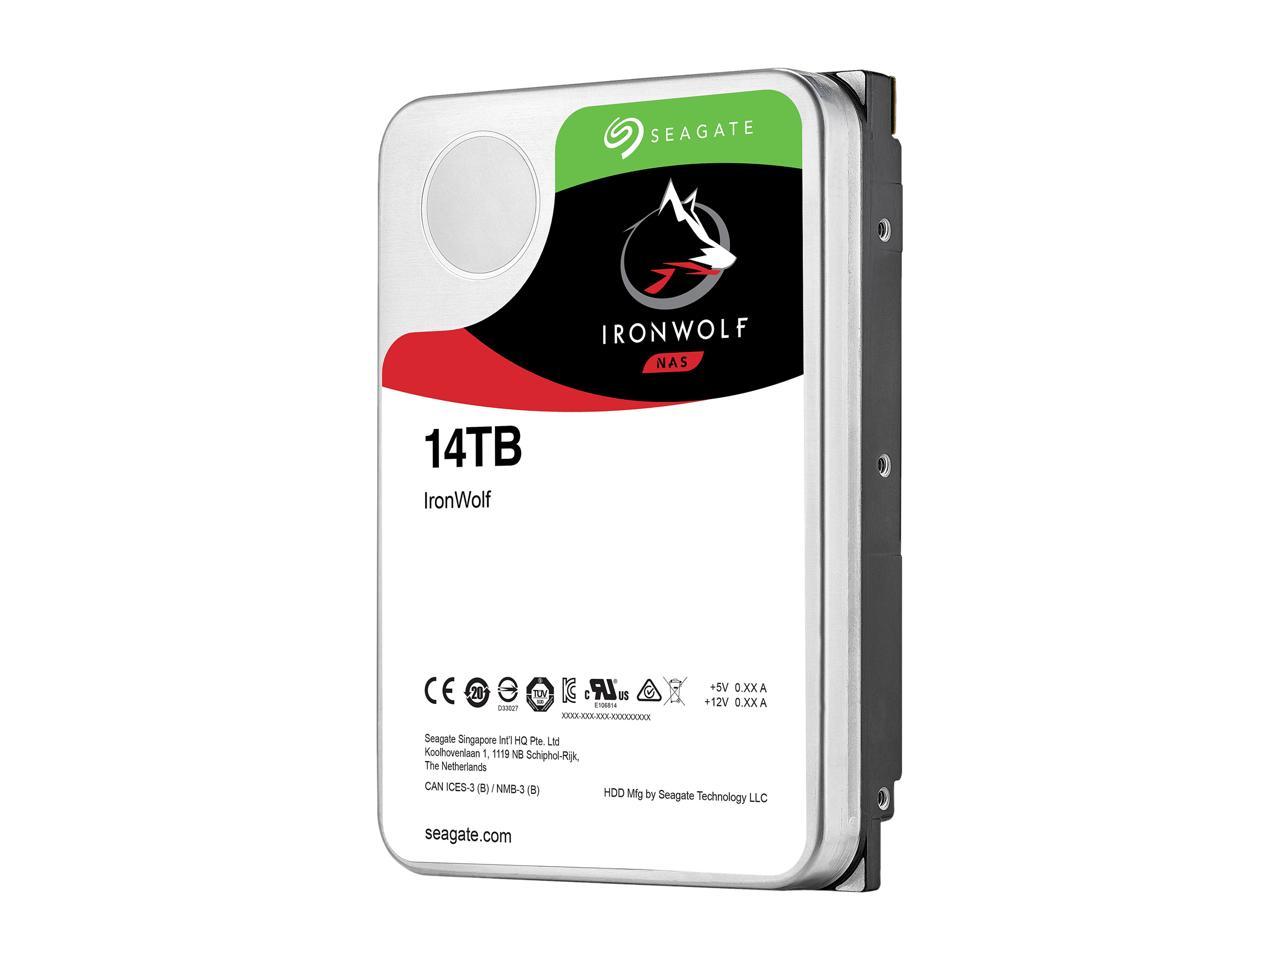 Seagate Ironwolf 14Tb Nas Hard Drive 7200 Rpm 256Mb Cache Sata 6.0Gb/S Cmr 3.5" Internal Hdd For Raid Network Attached Storage St14000Vn0008